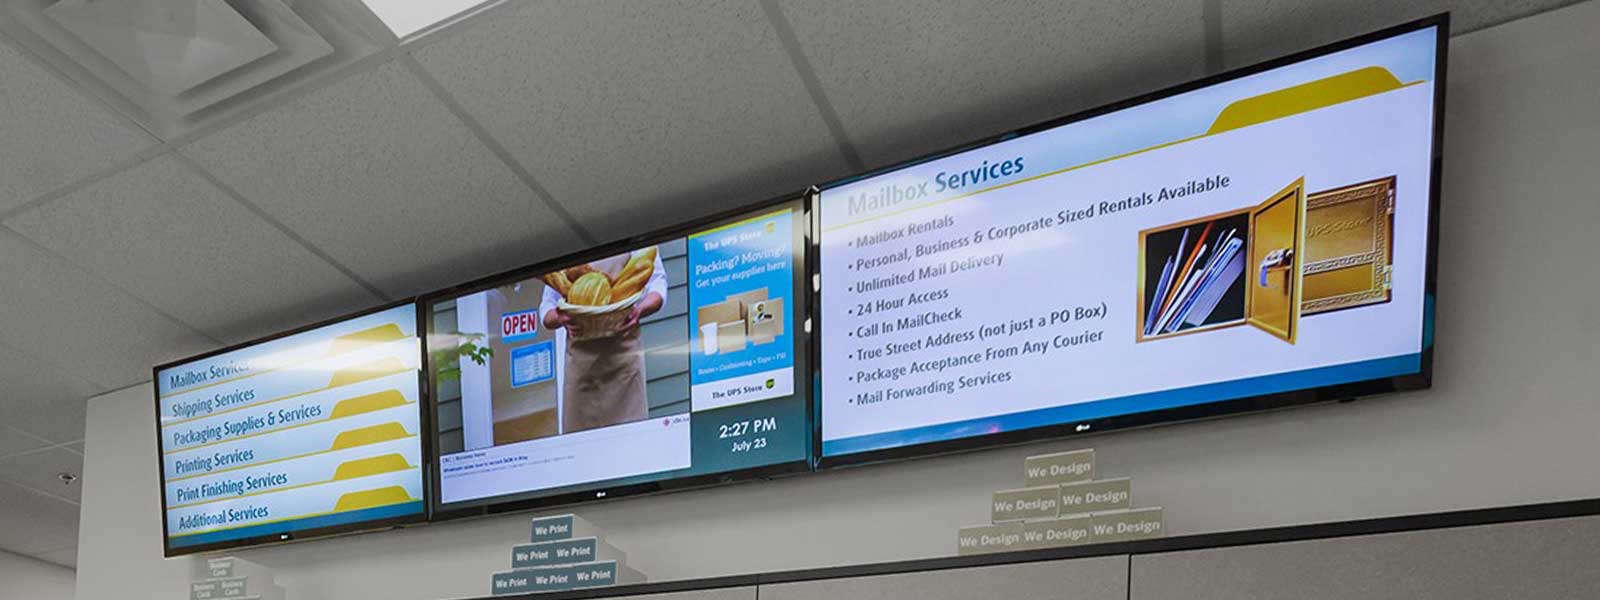 Digital signs displayed in a UPS store